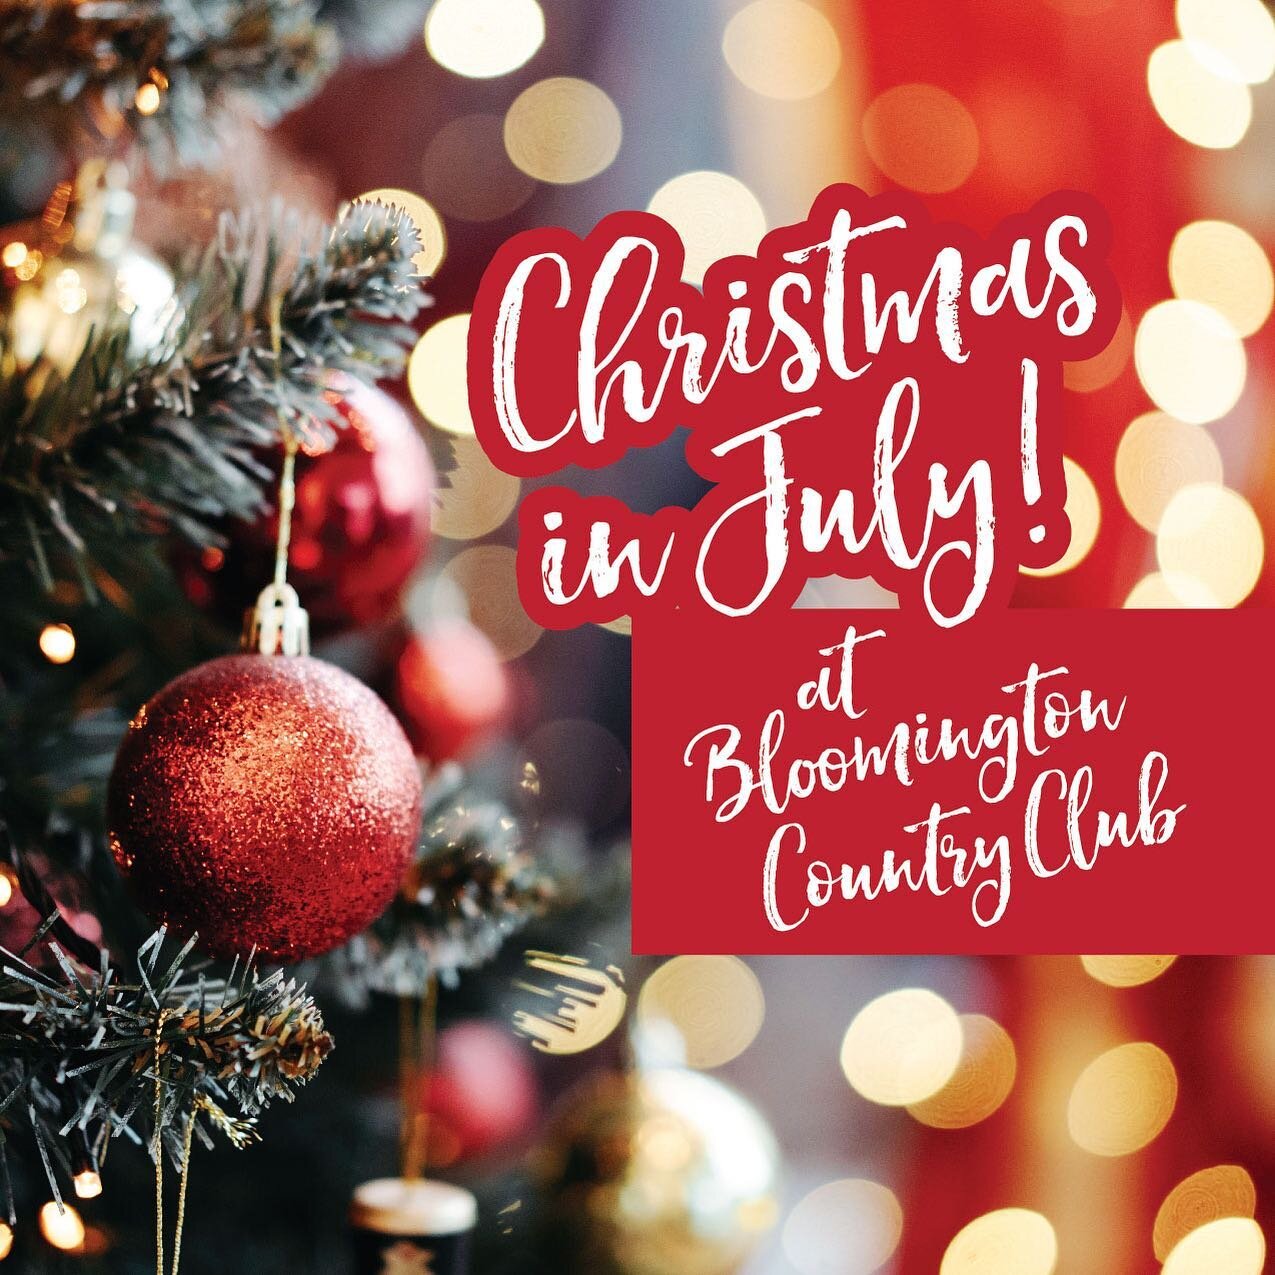 Christmas? The summer just arrived - kids are only now taking their summer breaks. And let&rsquo;s face it, jolly old Saint Nick may look smashing in a red suit and suspenders, but less so in an unbuttoned Tommy Bahama shirt and flip-flops.

Why shou